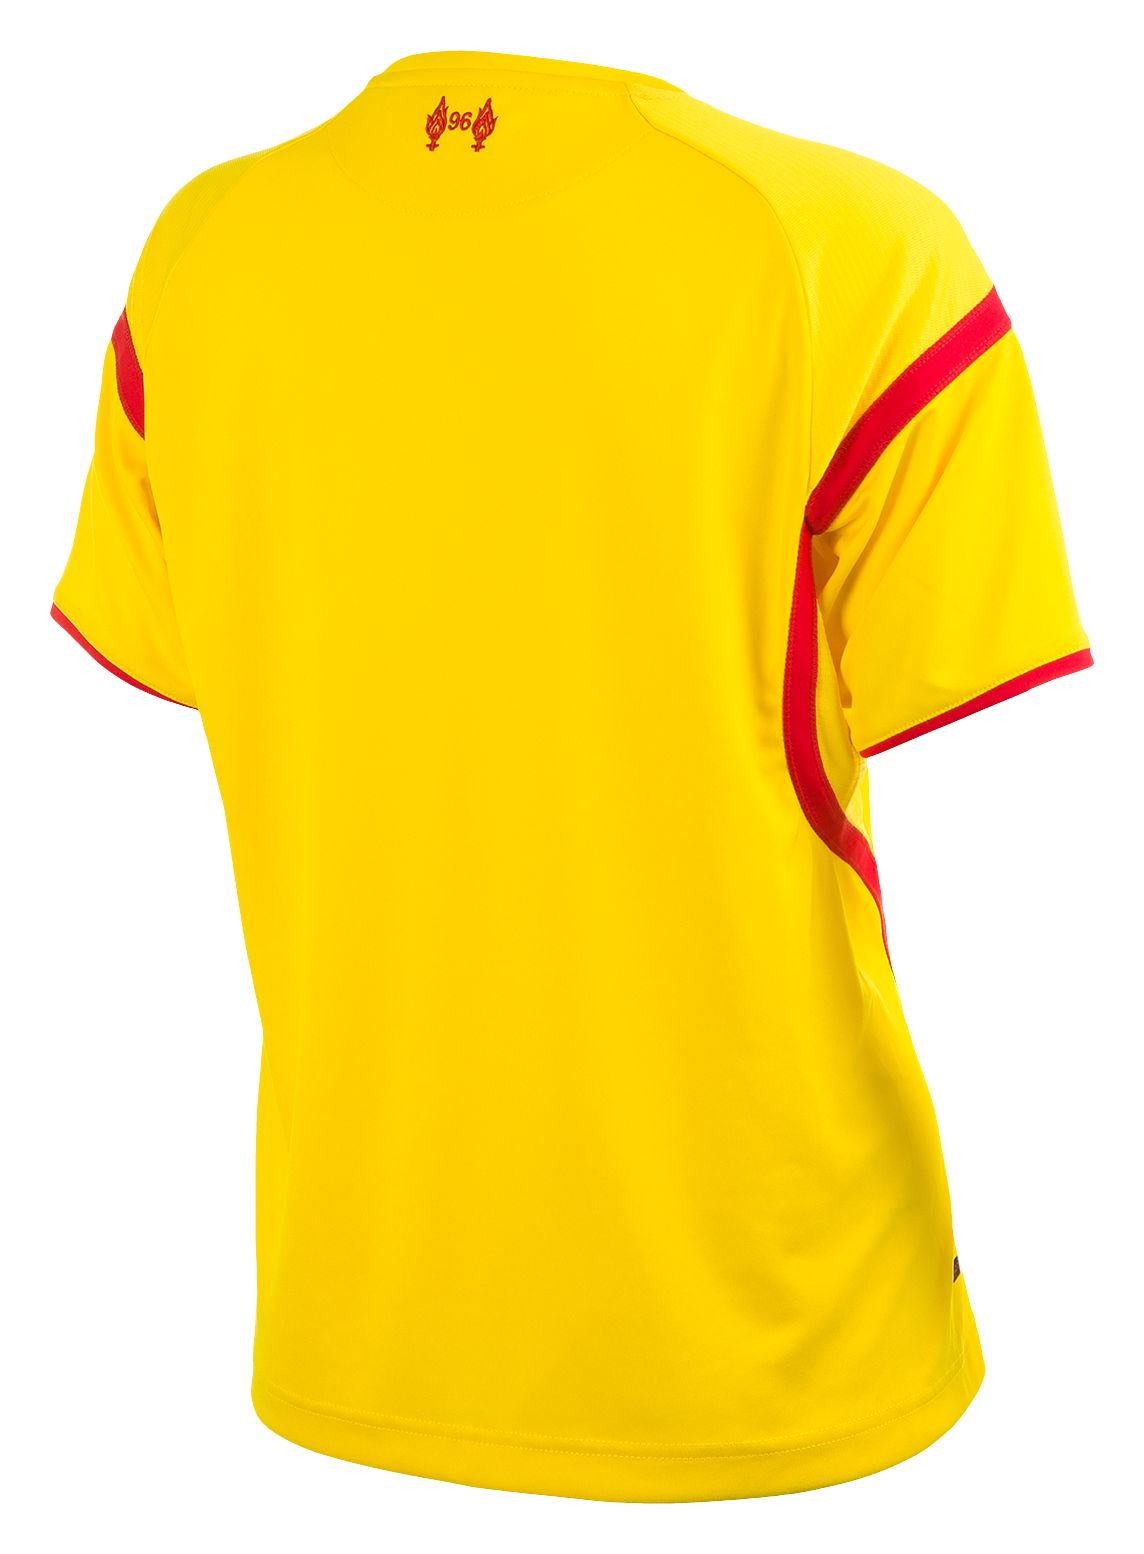 Liverpool Away Ladies Short Sleeve Jersey 2014/15, Cyber Yellow with High Risk Red image number 0